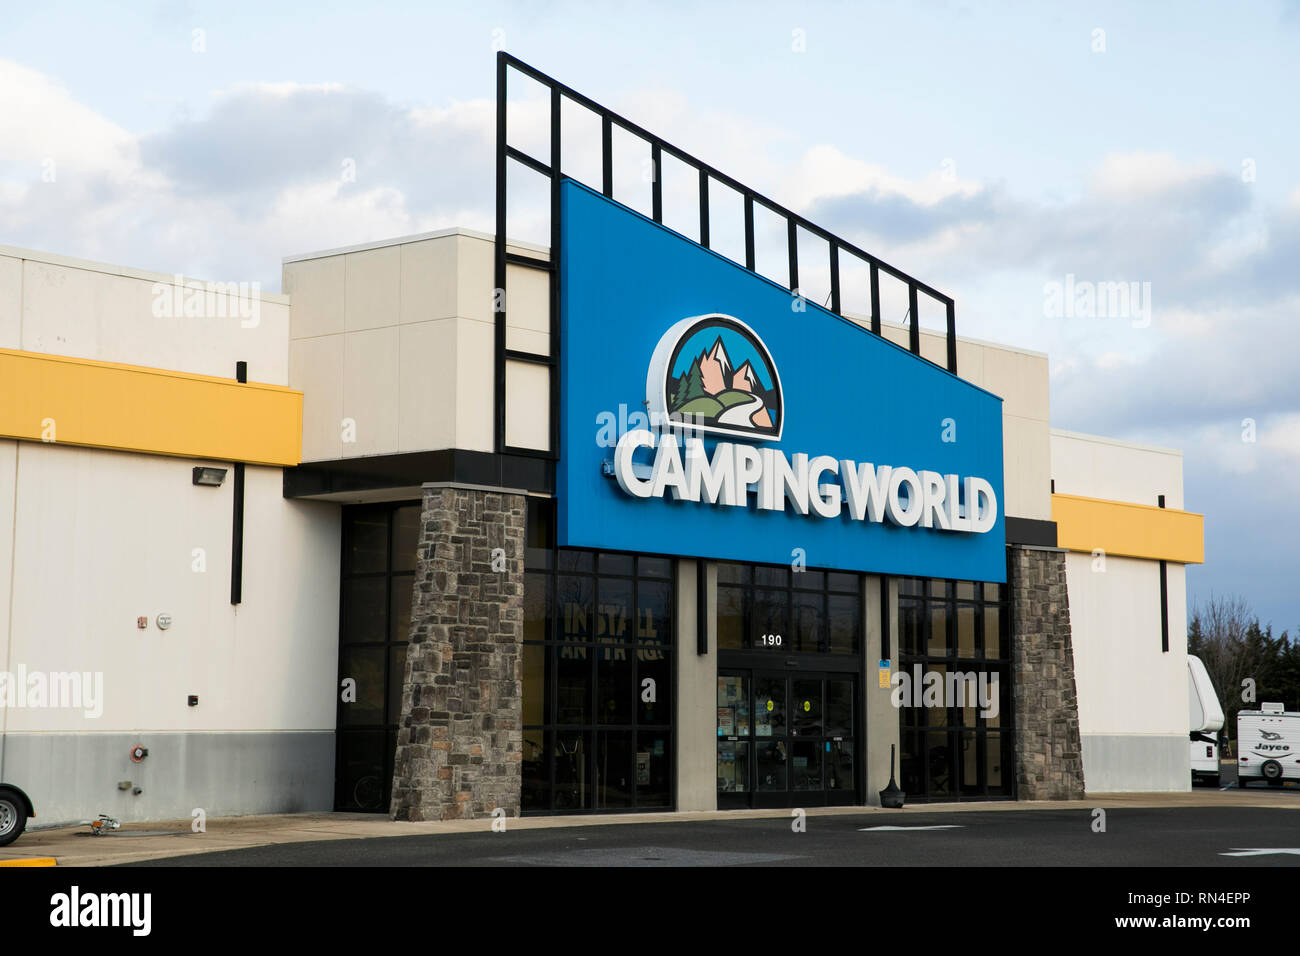 A logo sign outside of a Camping World retail store location in Winchester, Virginia on February 13, 2019. Stock Photo